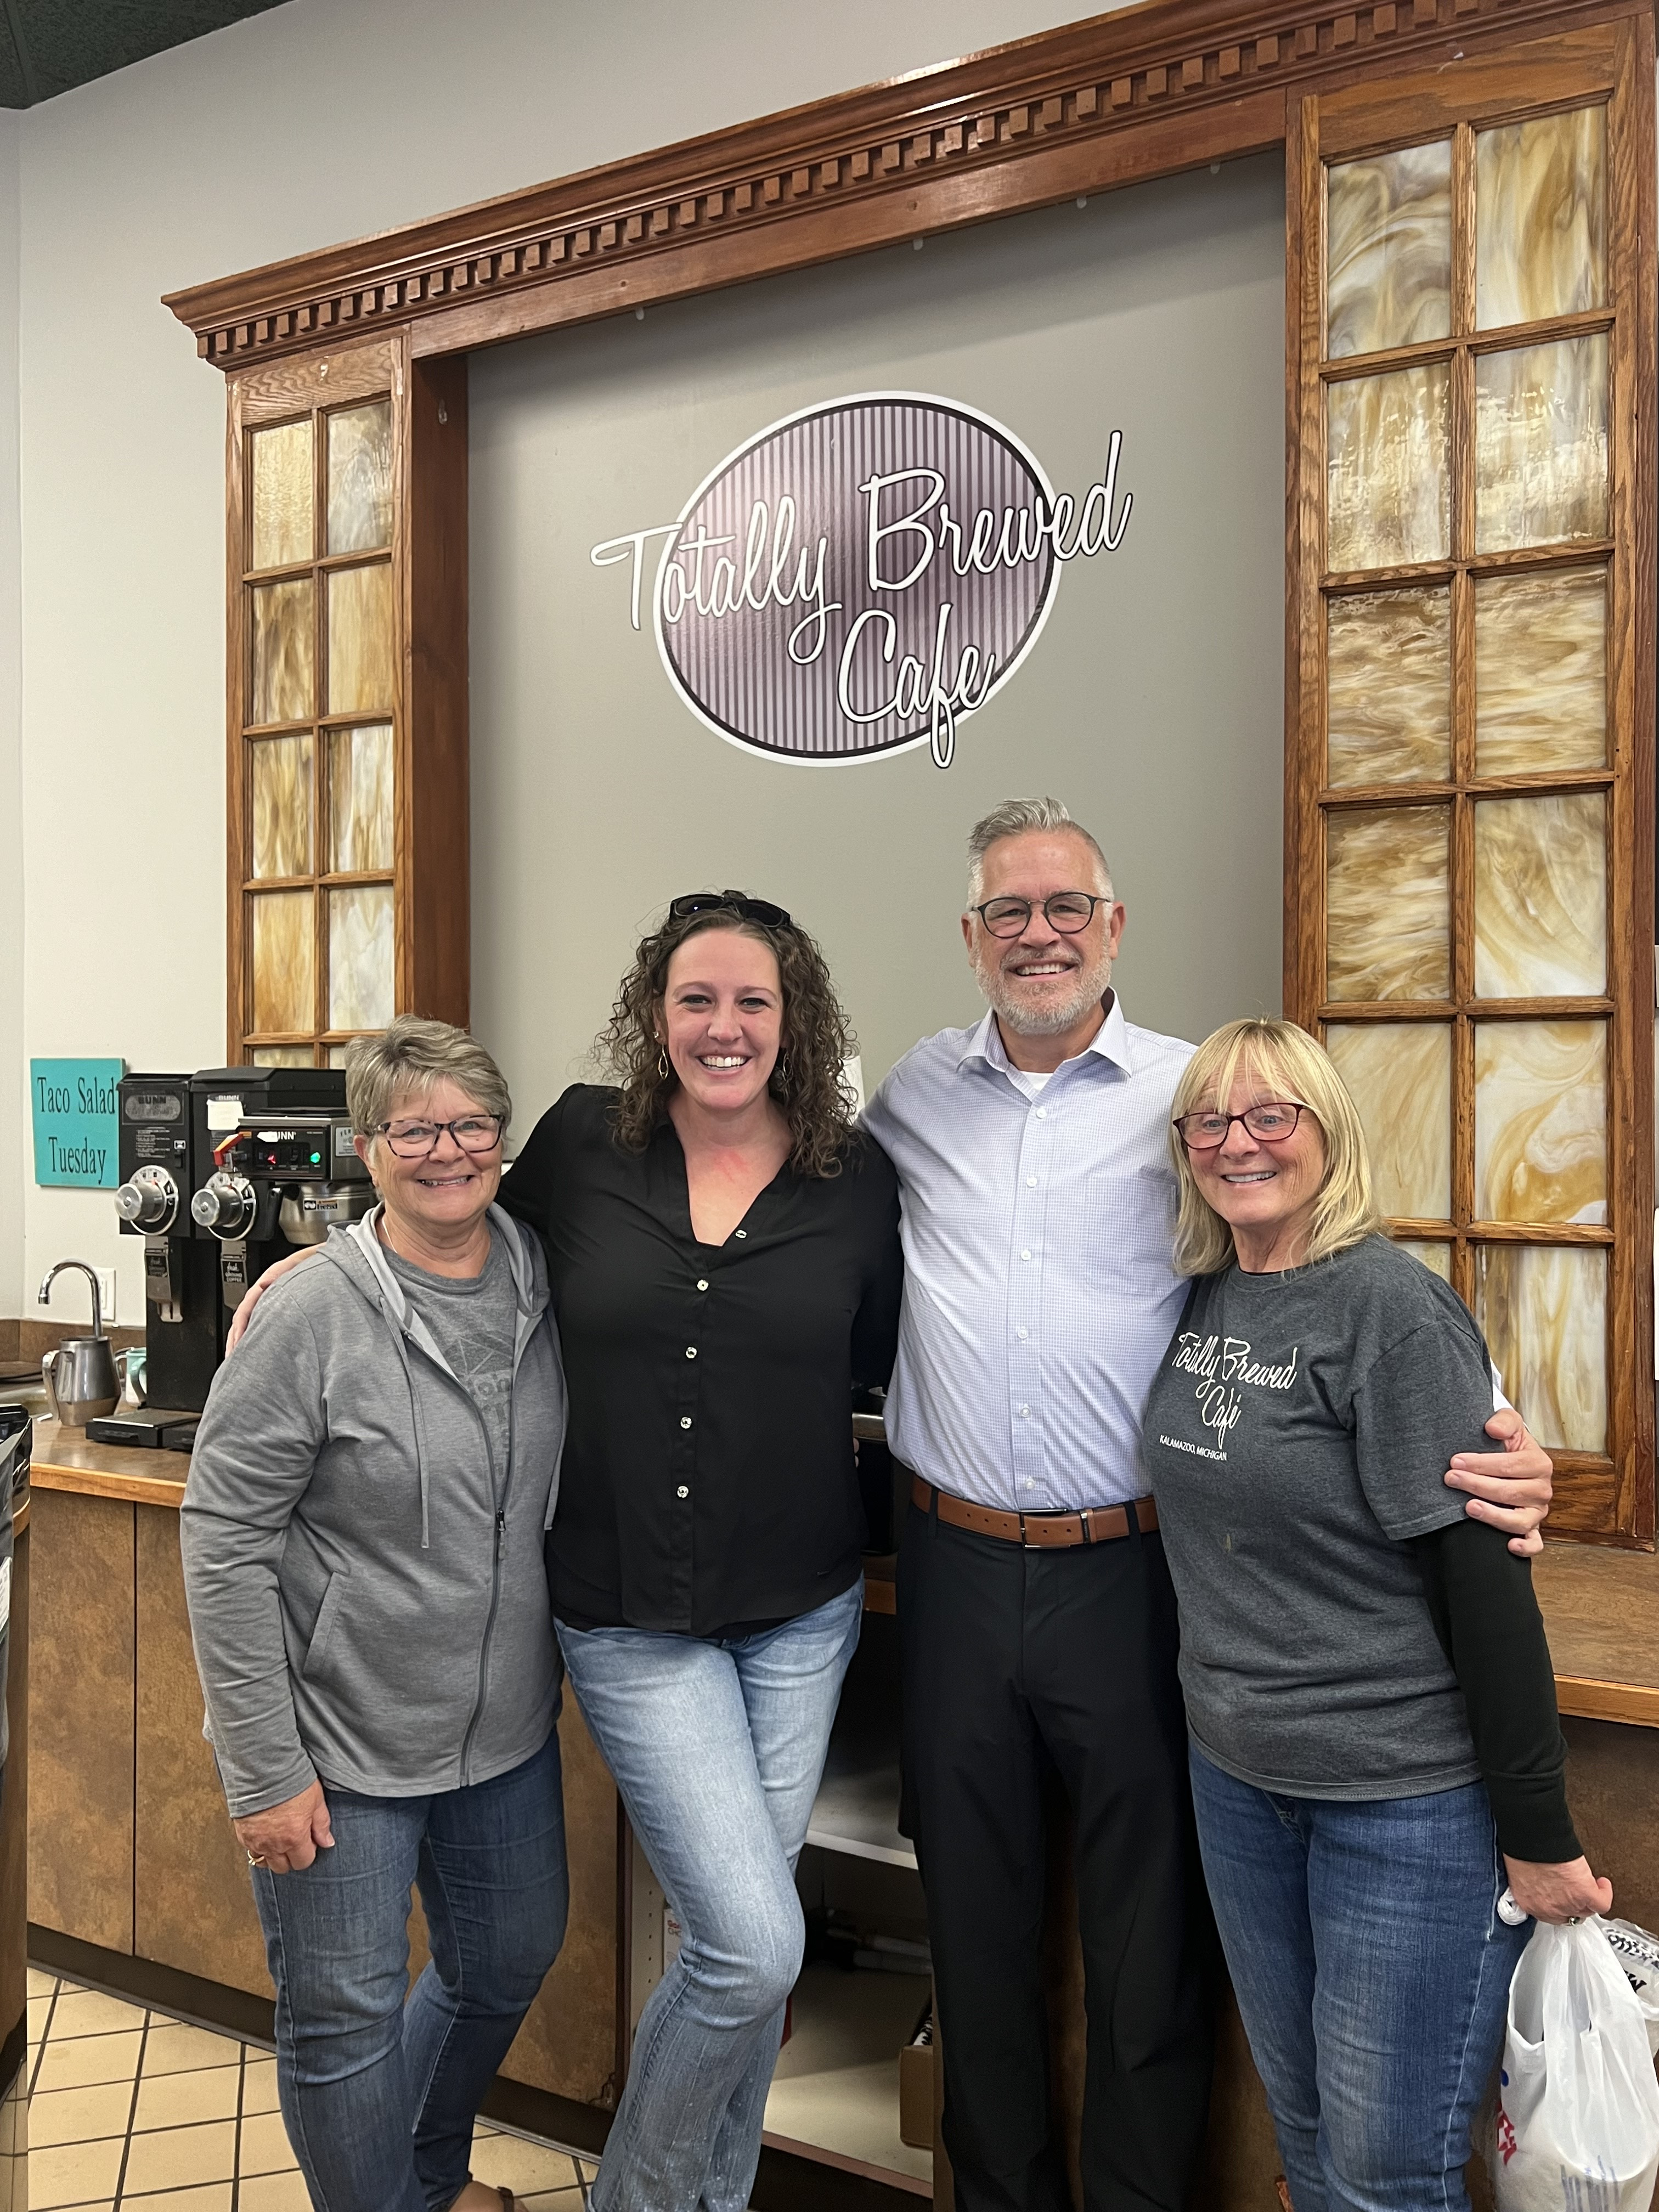 Mark Liddle poses for a photo with former Totally Brewed Cafe Owner Laurie East and the new co-owners Jess Pierson and her mother, Jennifer Nederhoed. (Photo provided by Jess Pierson) 